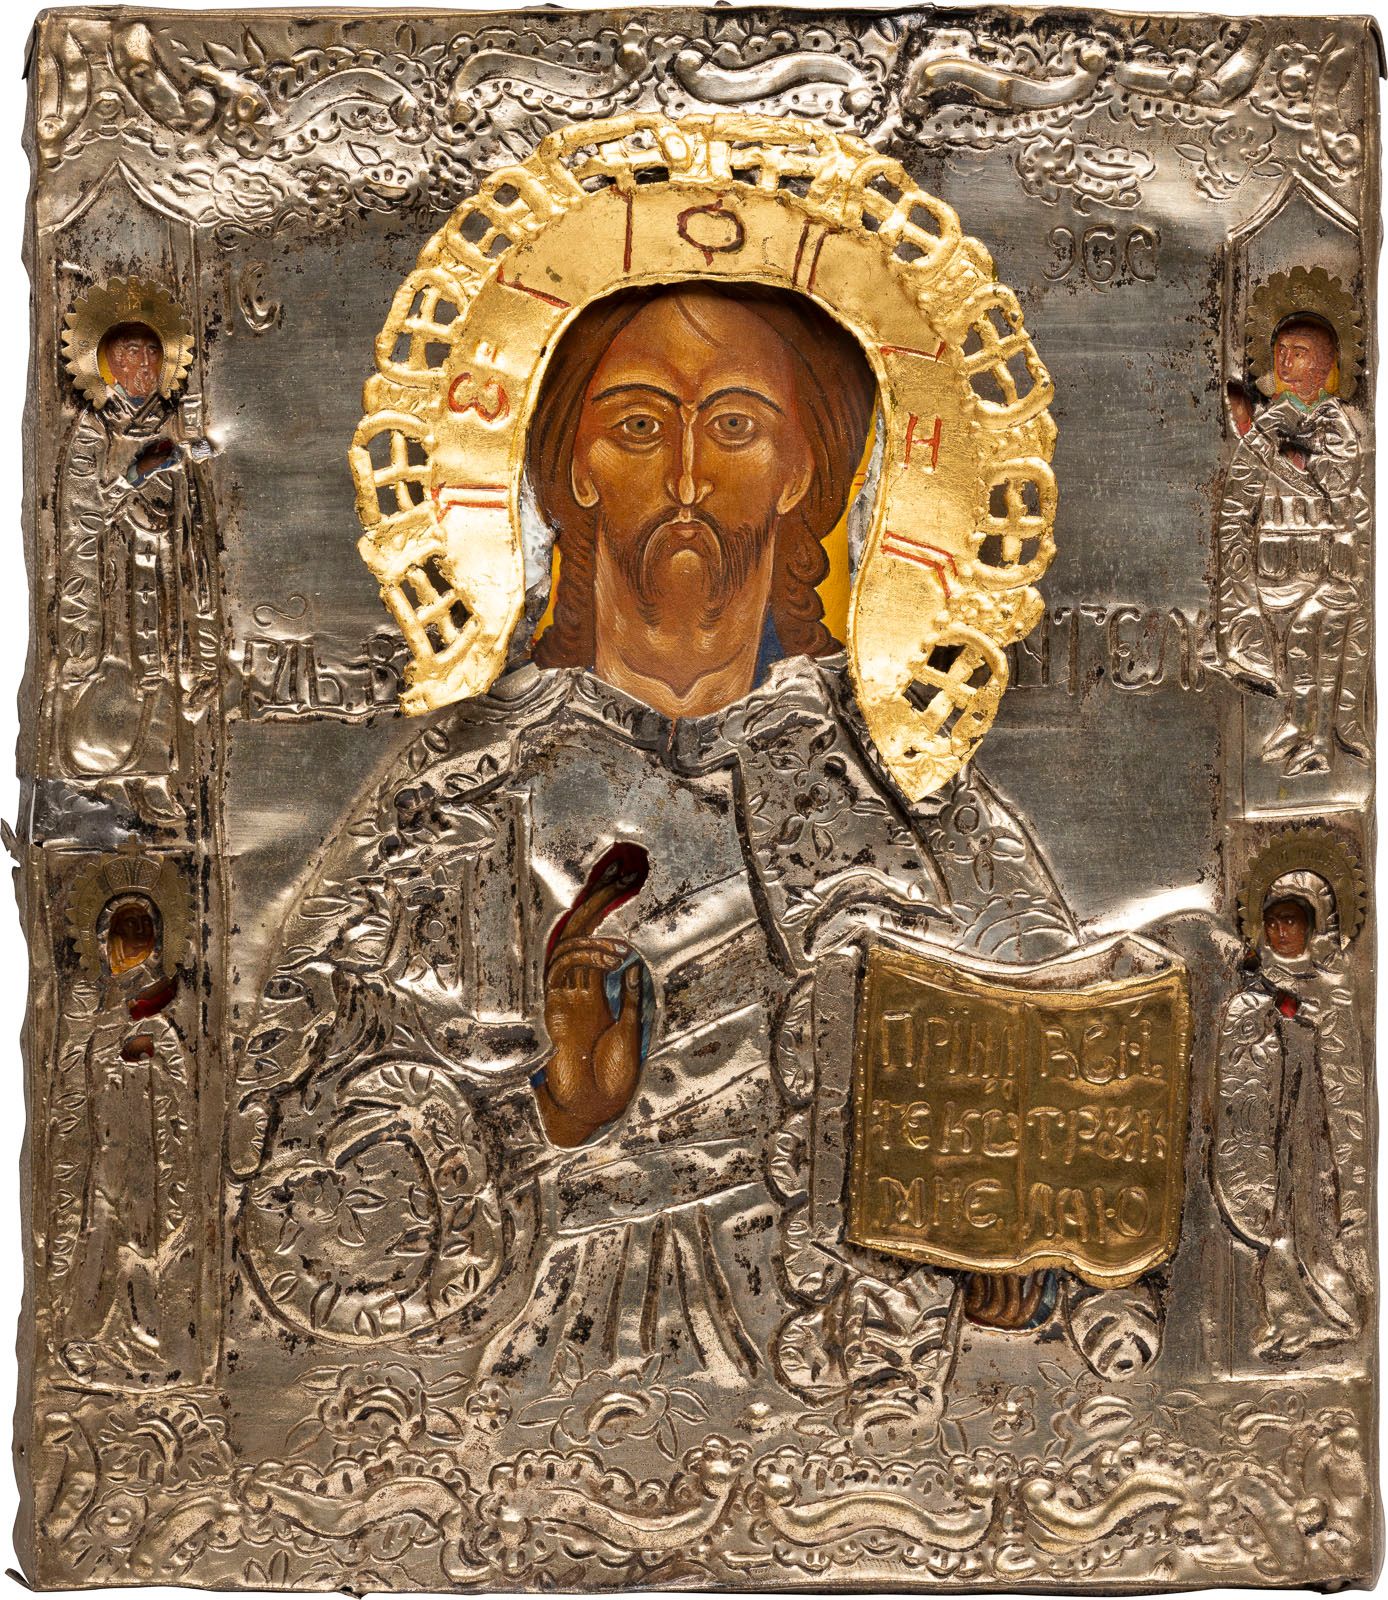 AN ICON SHOWING CHRIST PANTOKRATOR WITH OKLAD UN ICONO QUE MUESTRA A CRISTO PANT&hellip;